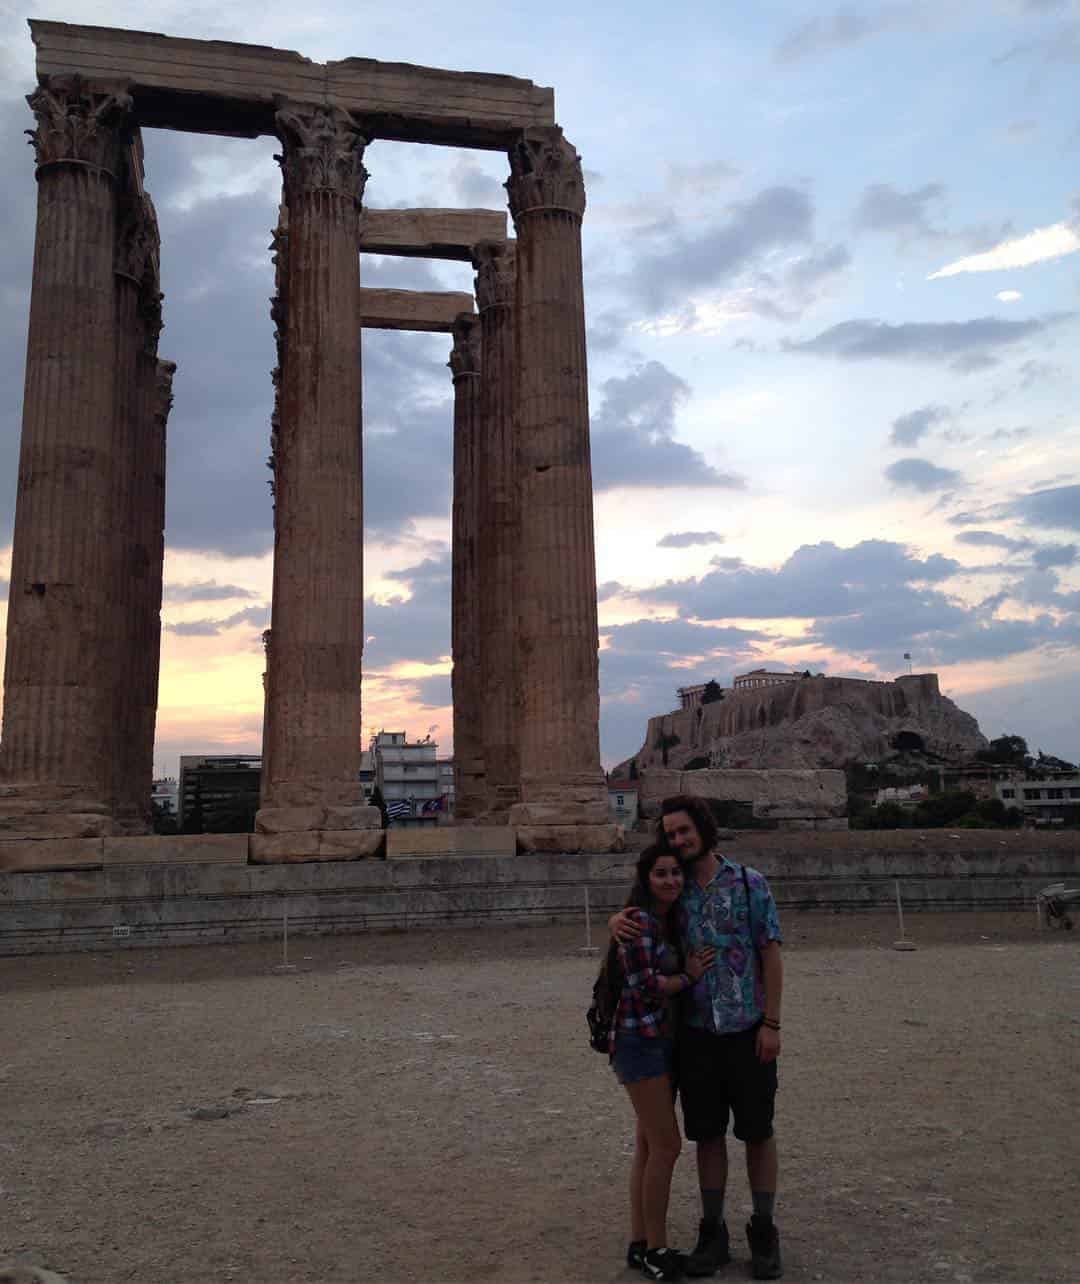 With my lovely girlfriend Jacki in Athens, Greece in 2016.